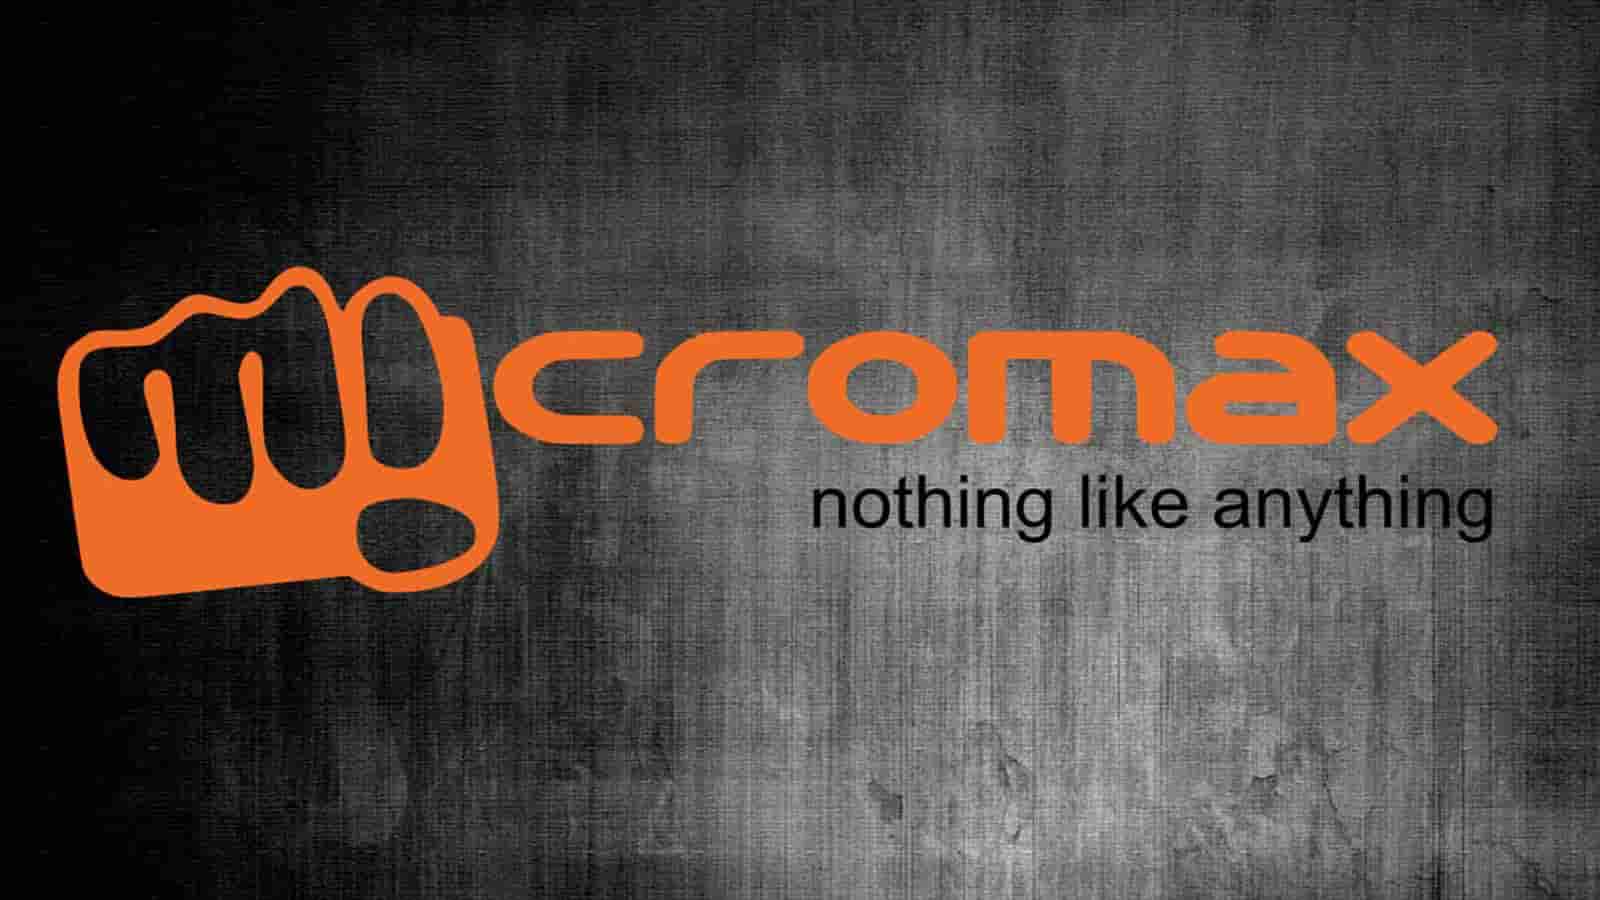 Micromax Company Belongs To Which Country? Micromax Origin Country?